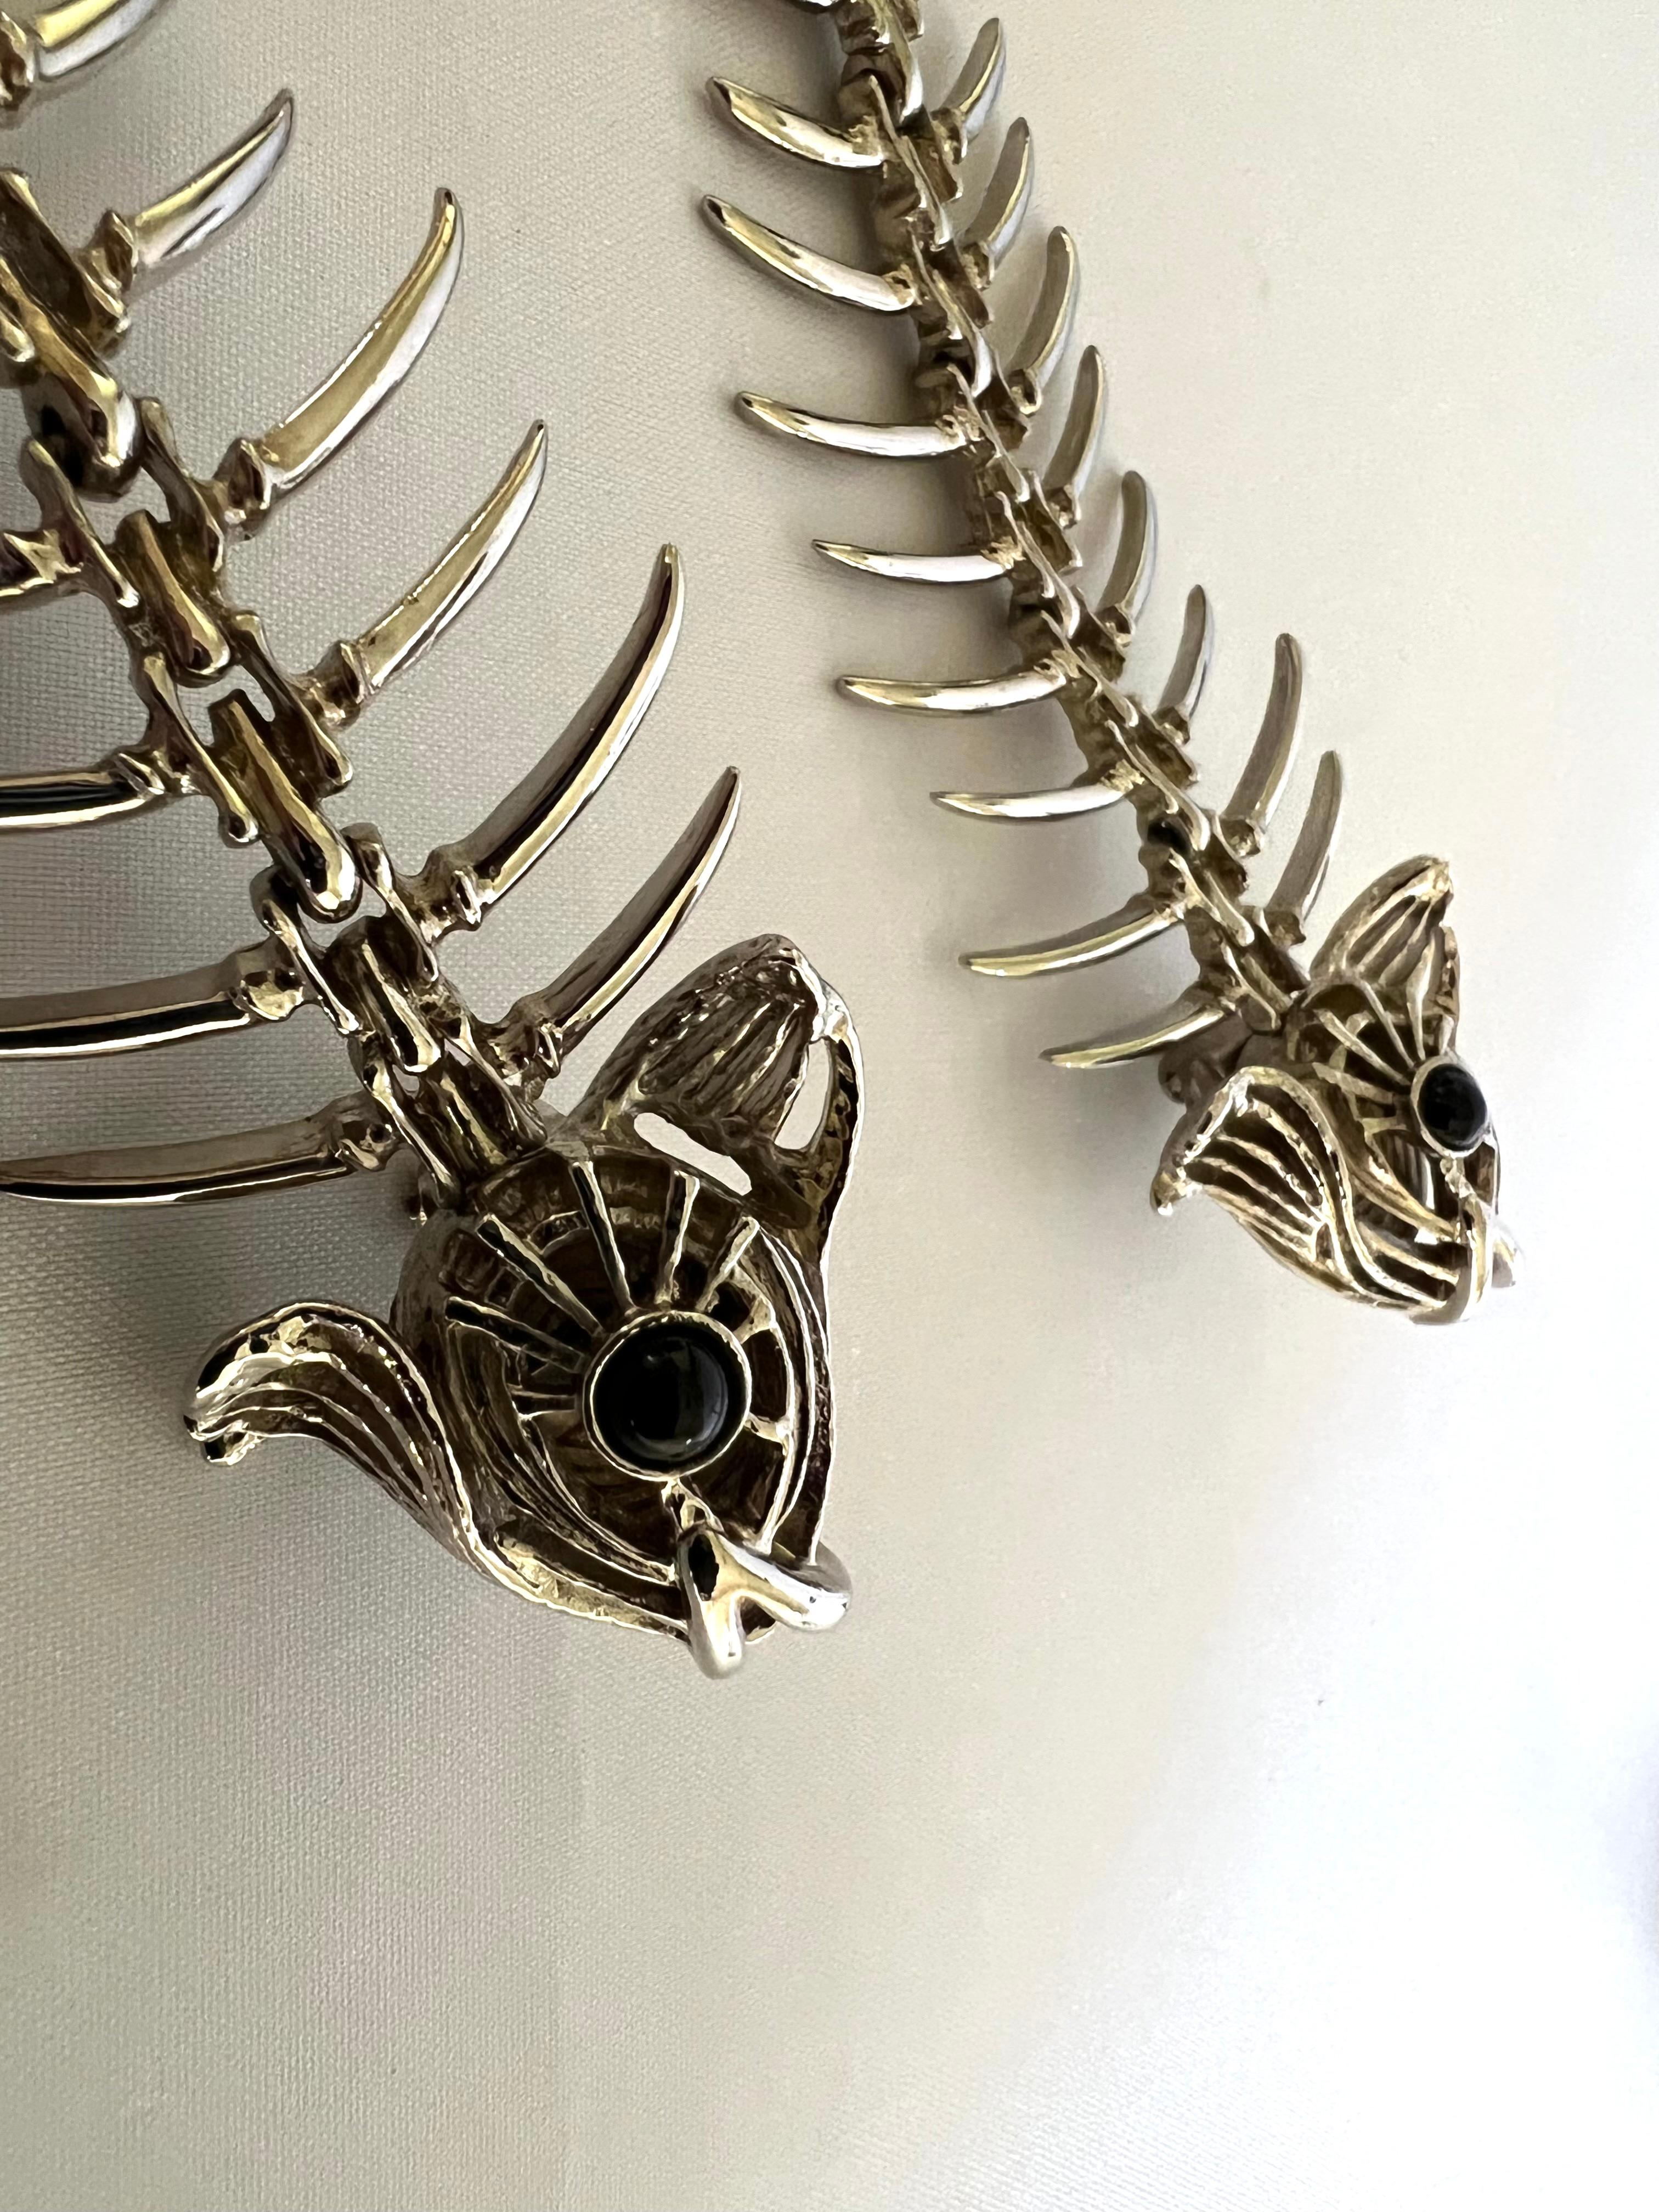 Spectacular vintage articulated French fish skeleton statement clip-on earrings - made in France circa 1990s. 